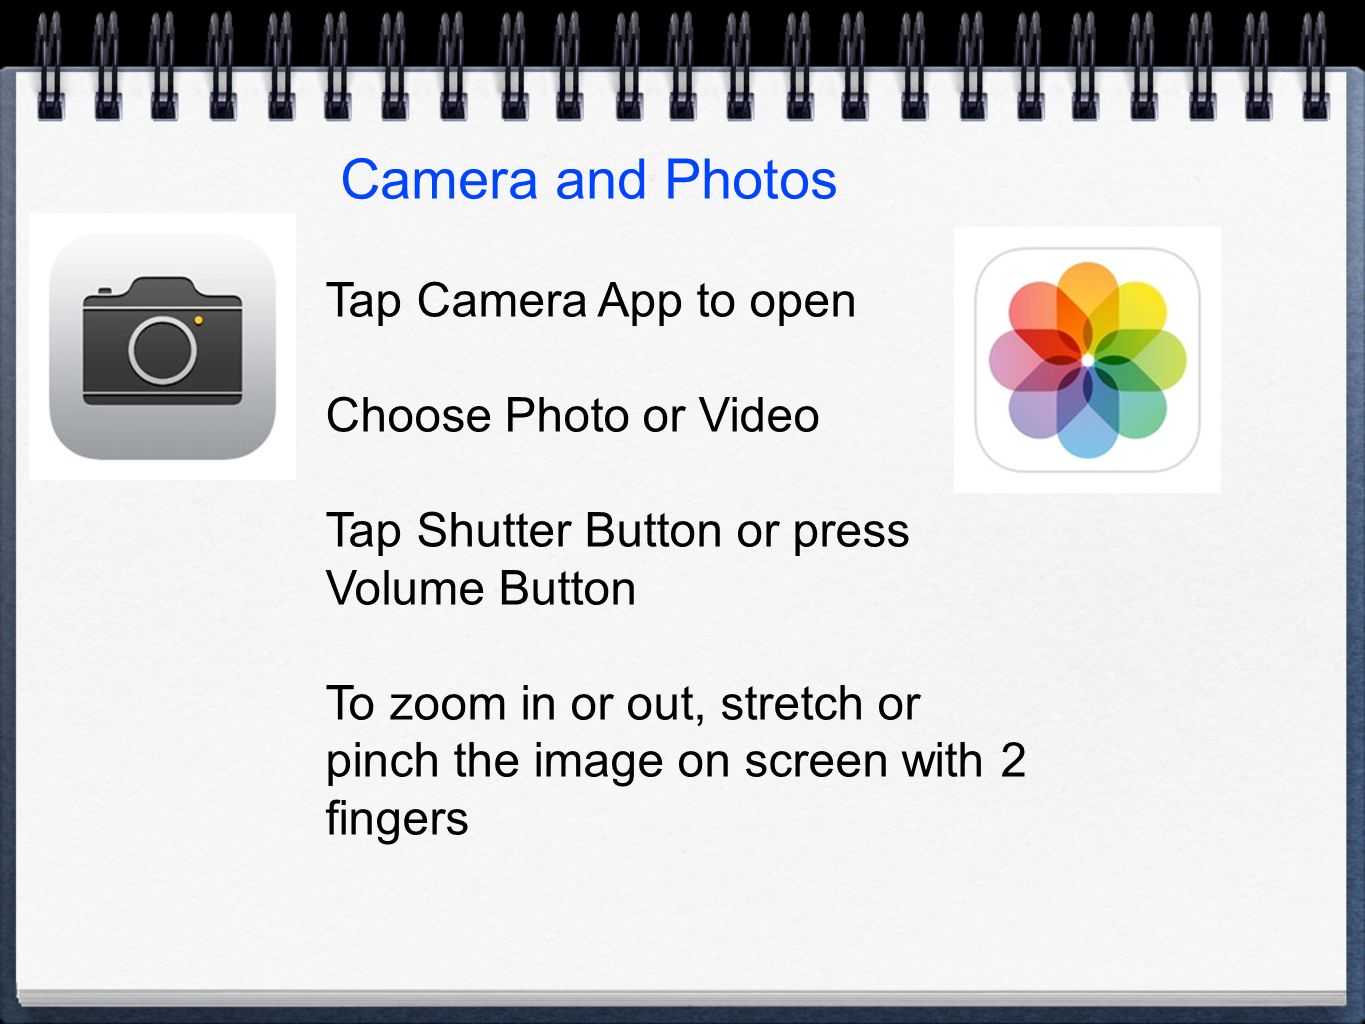 Camera and Photos Tap Camera App to open Choose Photo or Video Tap Shutter Button or press Volume Button To zoom in or out, stretch or pinch the image on screen with 2 fingers